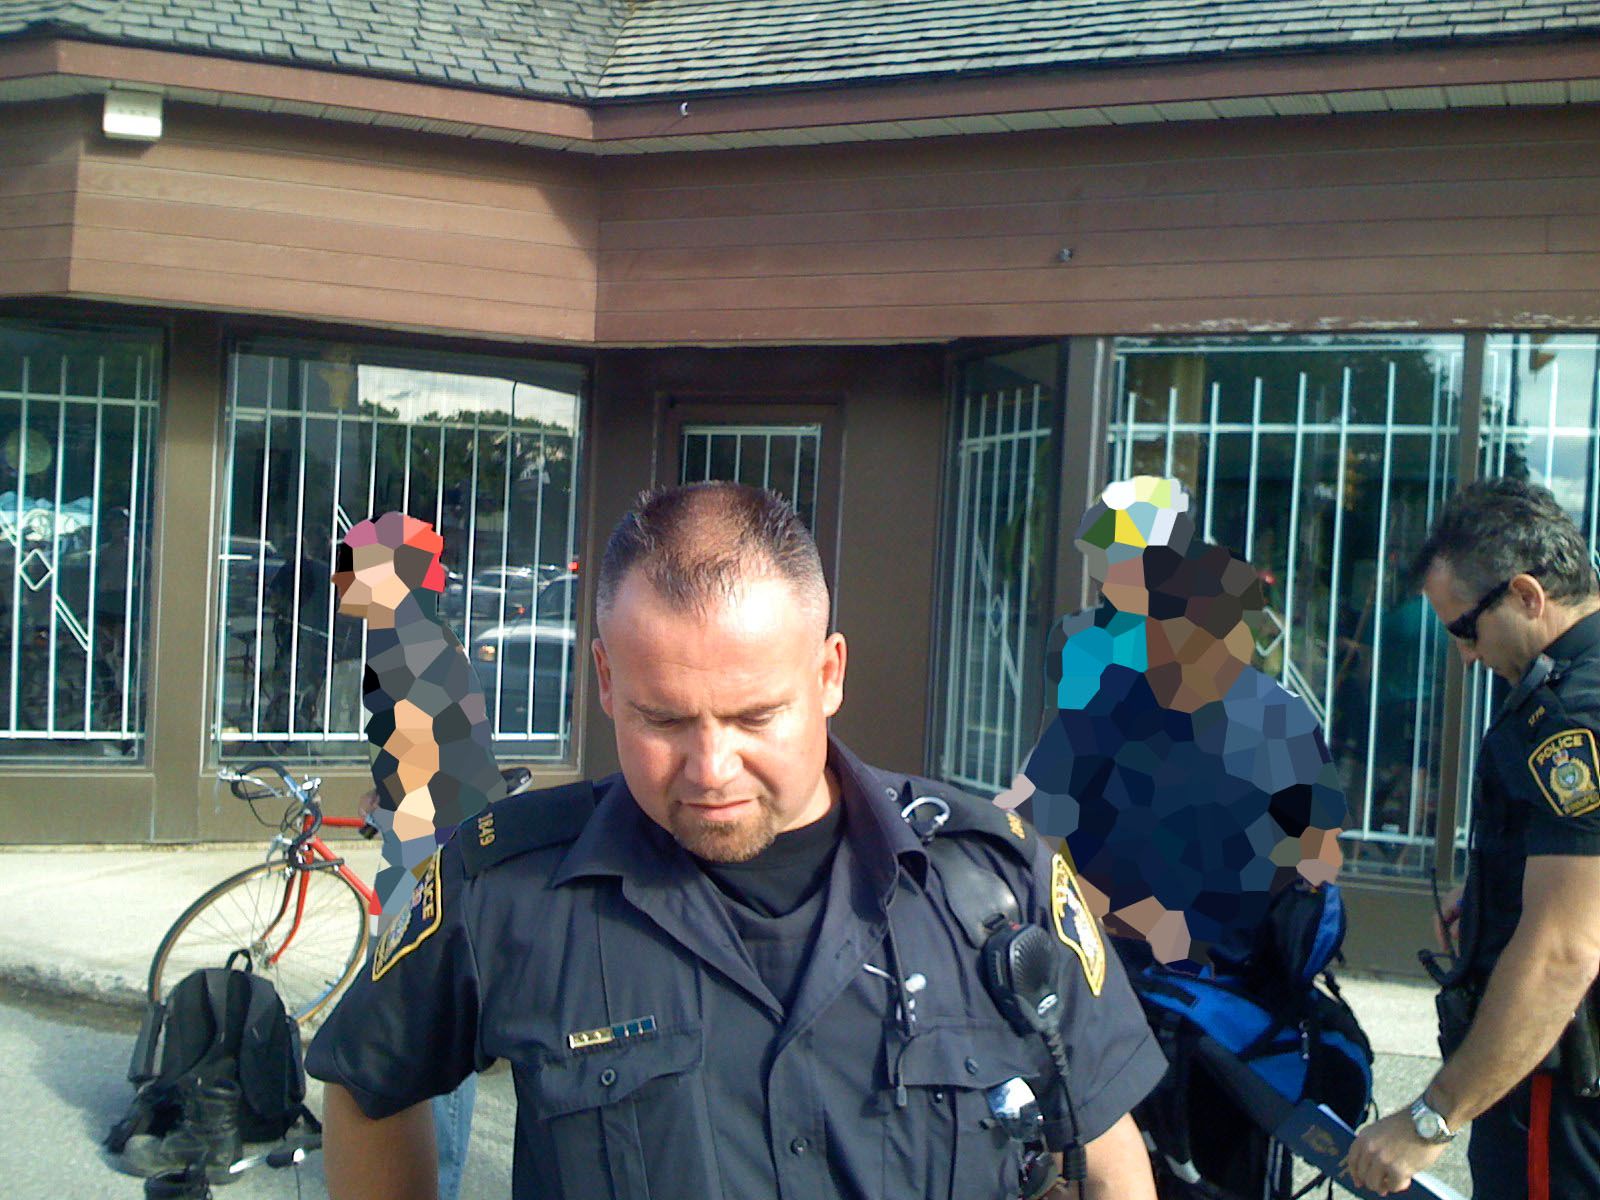 A photo of a semi-balding police officer facing the camera with his head tilted slightly downward